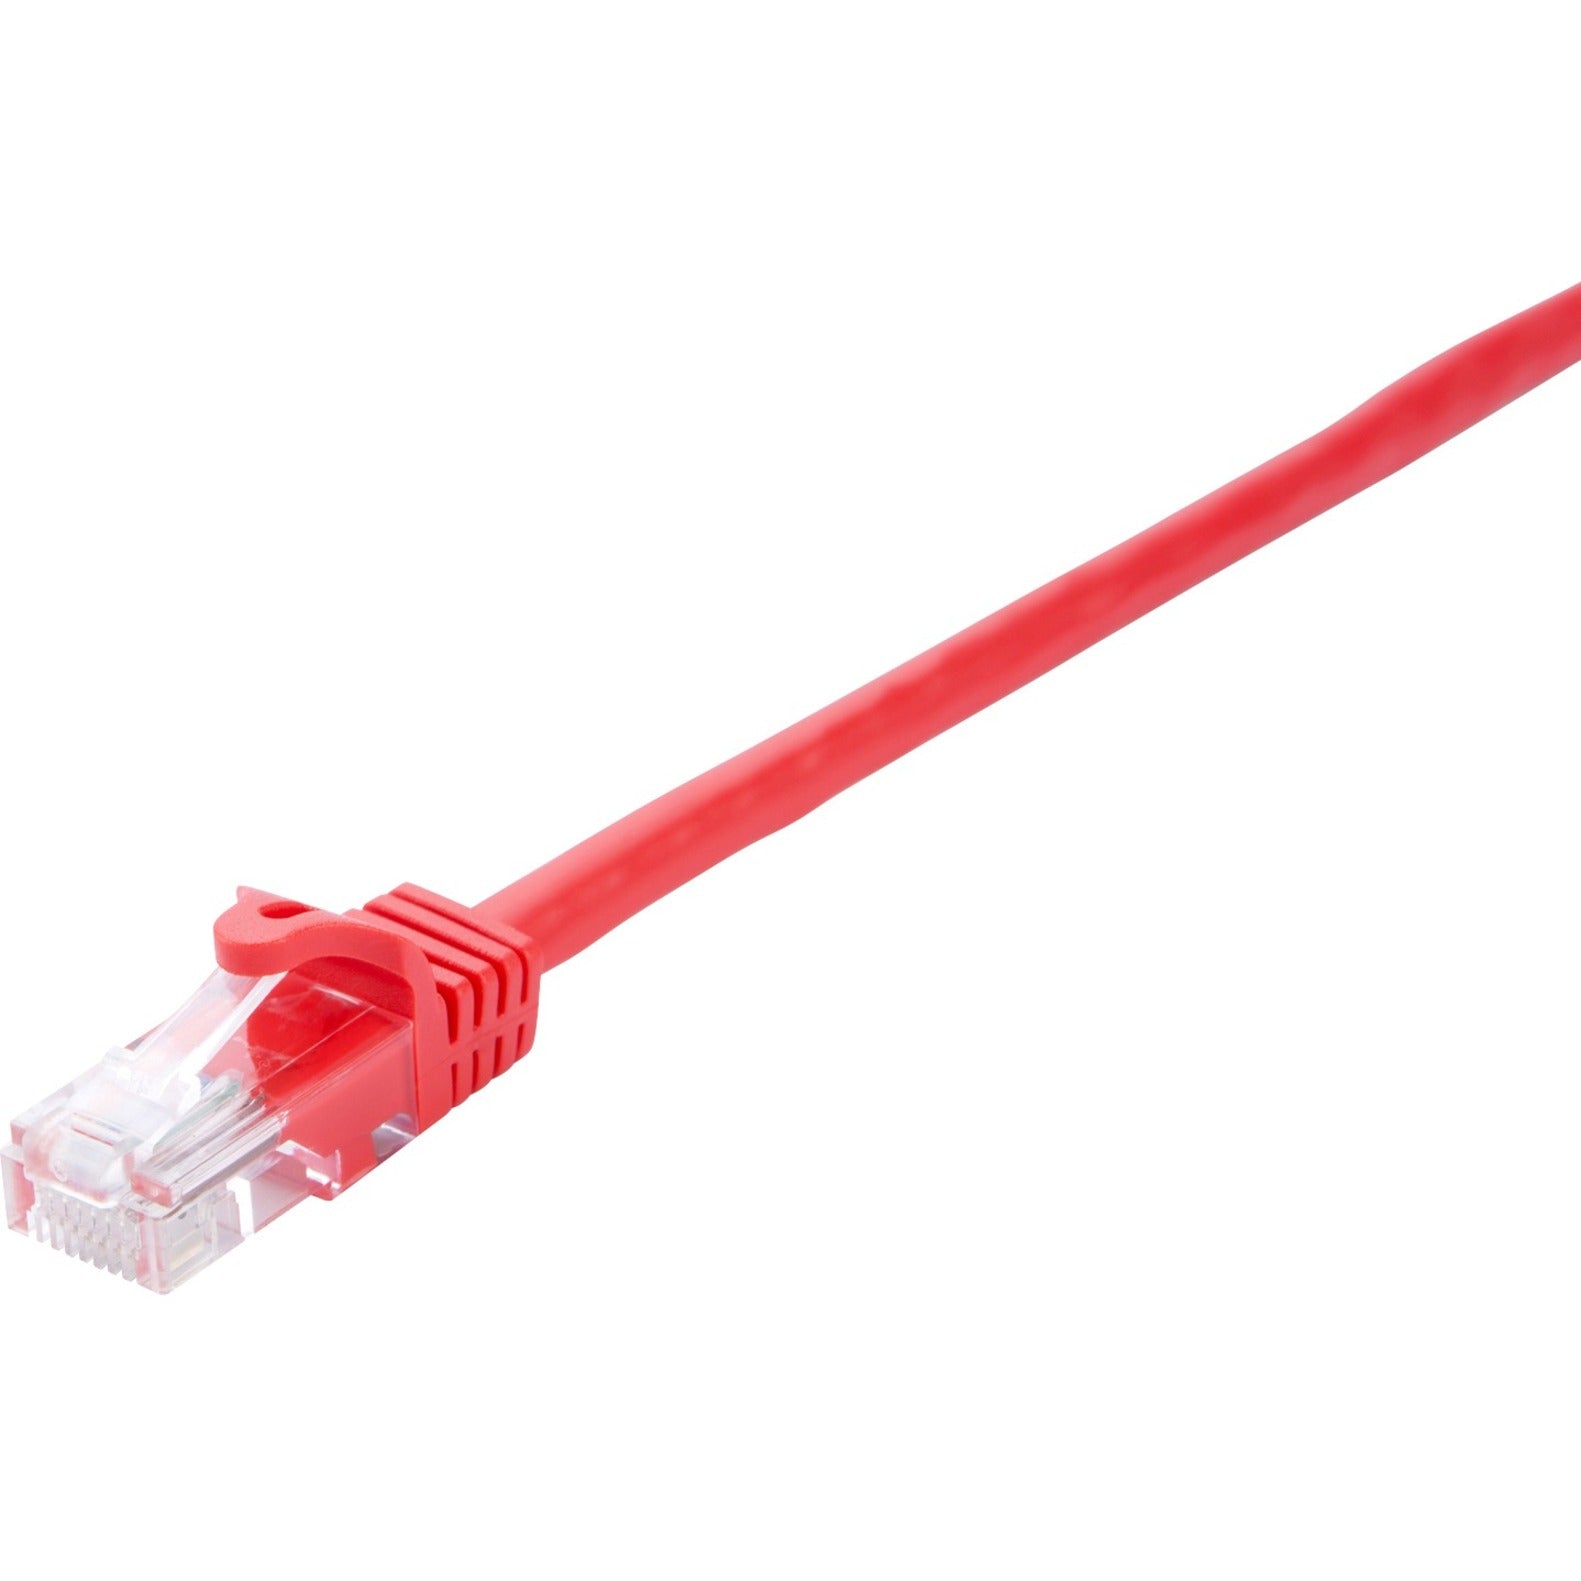 V7 V7CAT5UTP-50C-RED-1N Red Cat5e Unshielded (UTP) Cable RJ45 Male to RJ45 Male 0.5m 1.6ft, Molded, Snagless, Noise Reducing, Strain Relief, Gold Plated Connectors